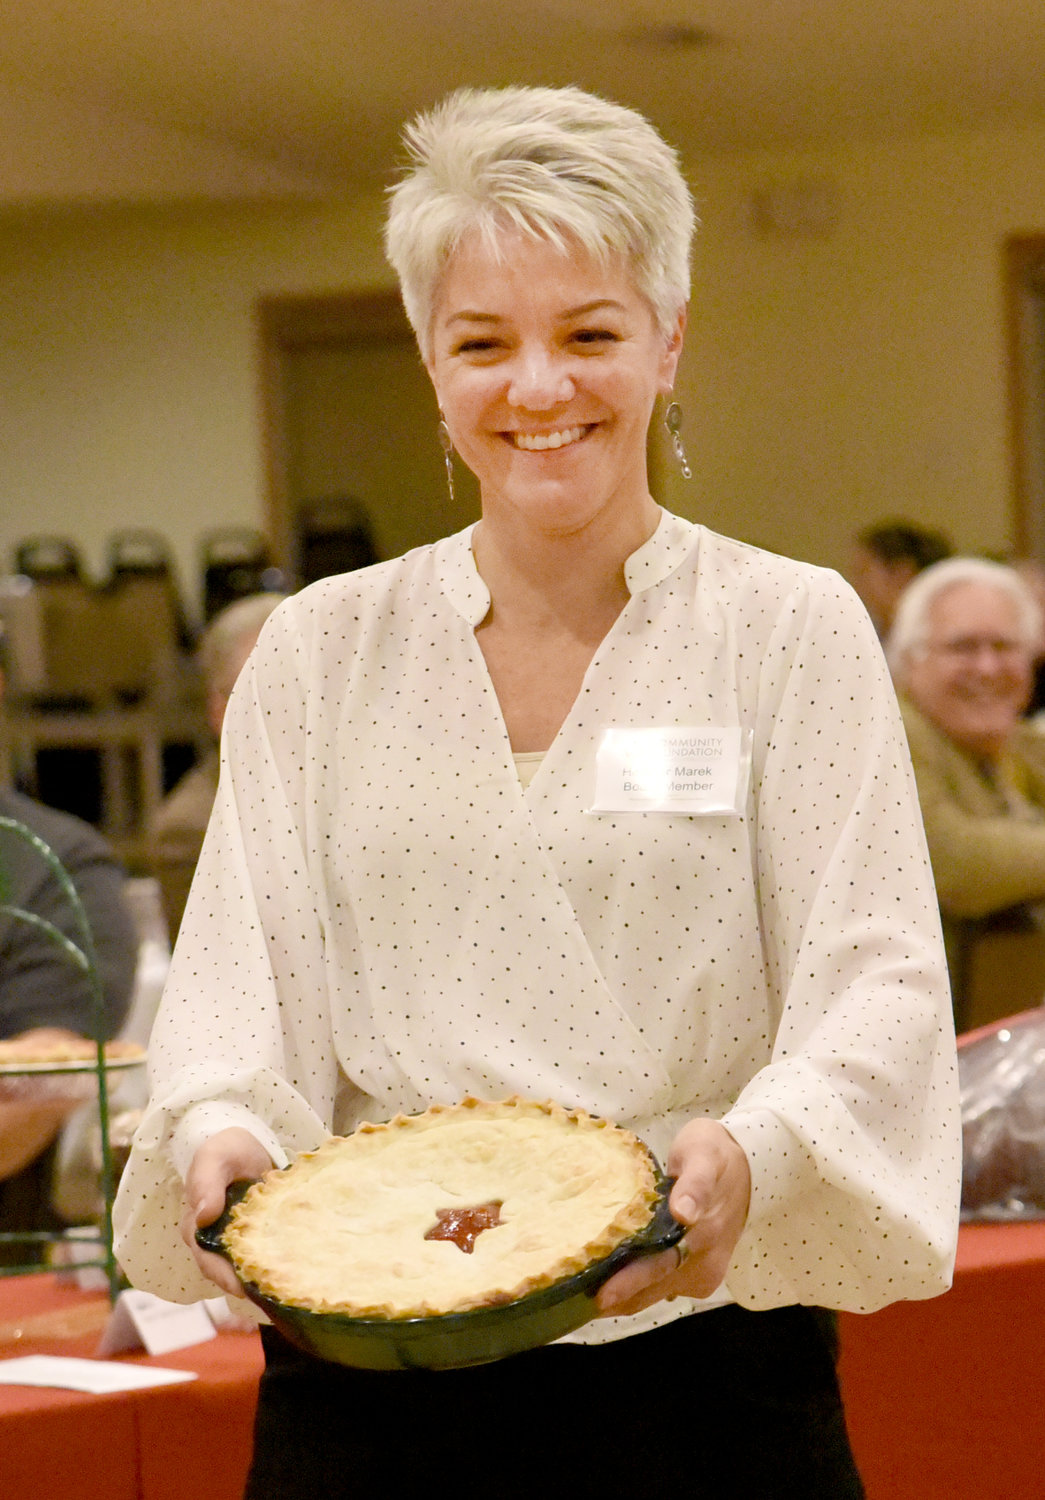 Heather Marek shows off a pie at the Washington County Community Foundation’s Chef Spotlight dinner on Nov. 4 at Holy Trinity Parish Life Center in Richmond. The desserts, auctioned off by Dwight Duwa of Duwa’s Auction Service, benefitted both the foundation and the Kalona Historical Village.